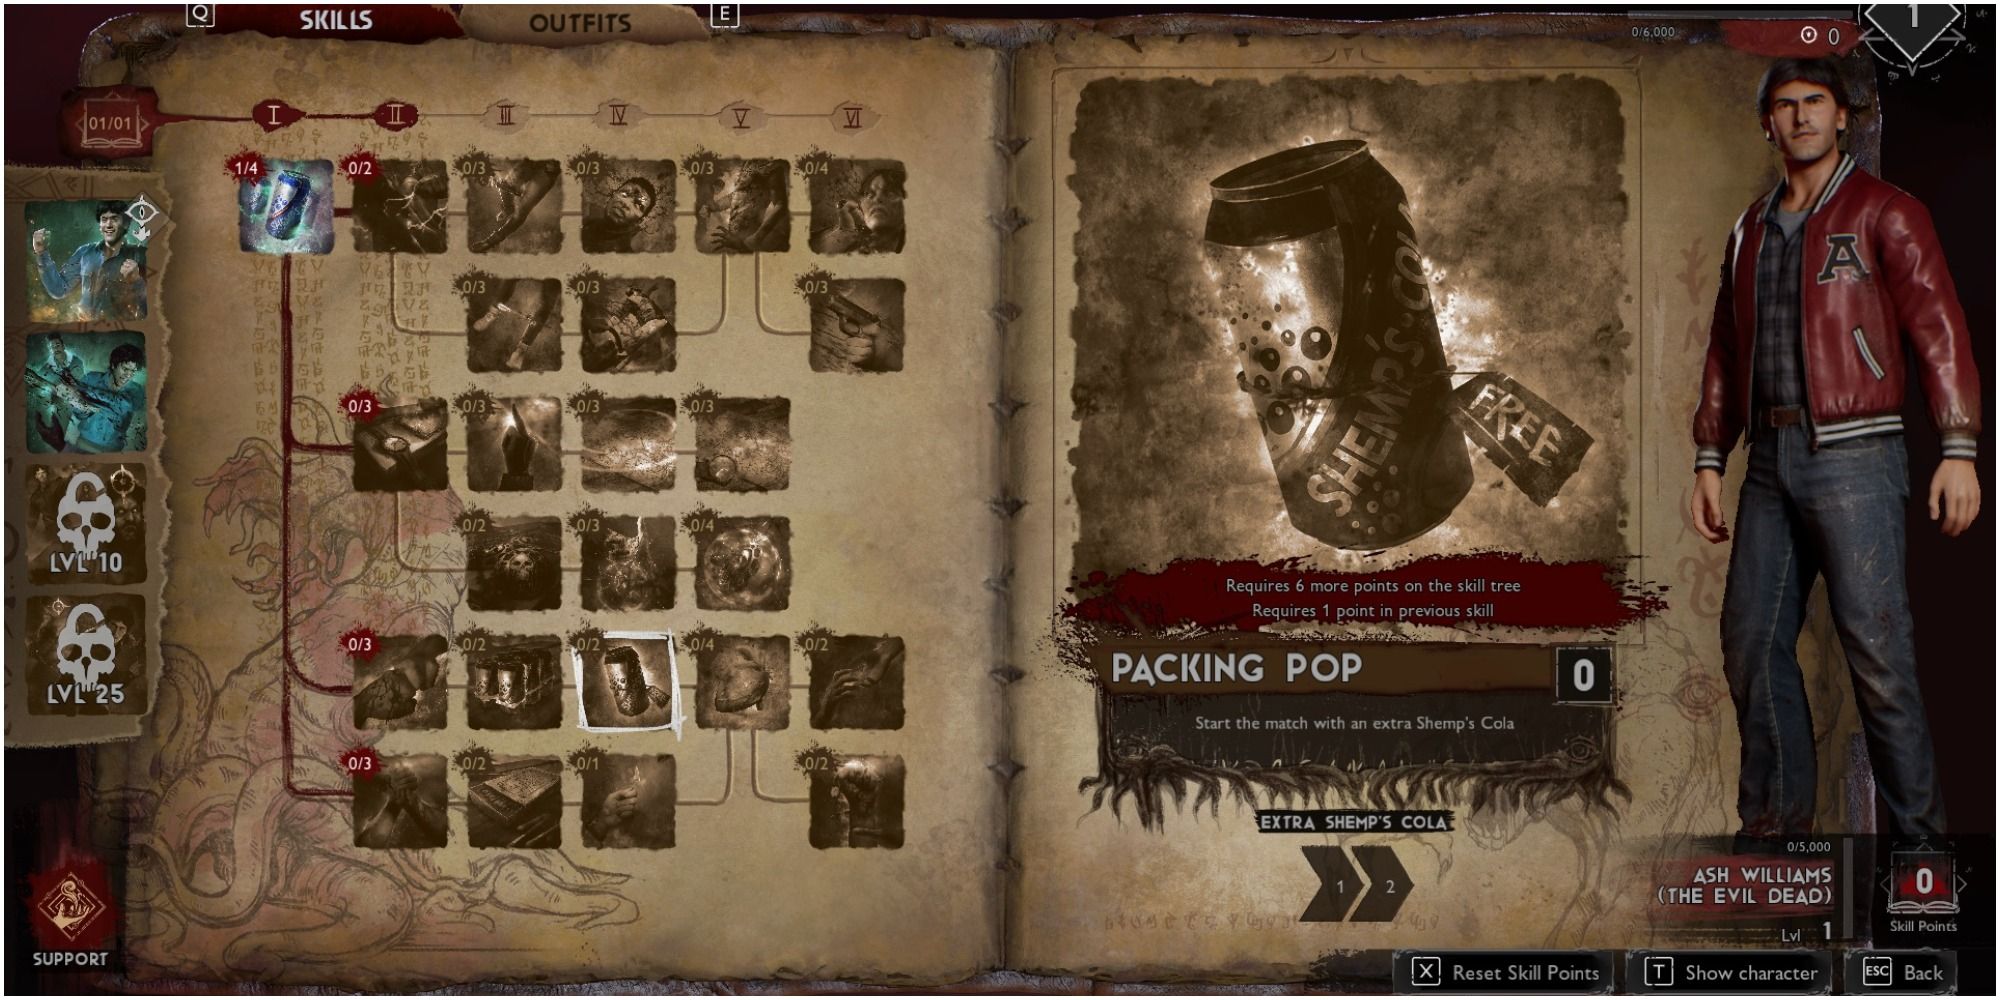 Evil Dead The Game Support Skill Packing Pop Description